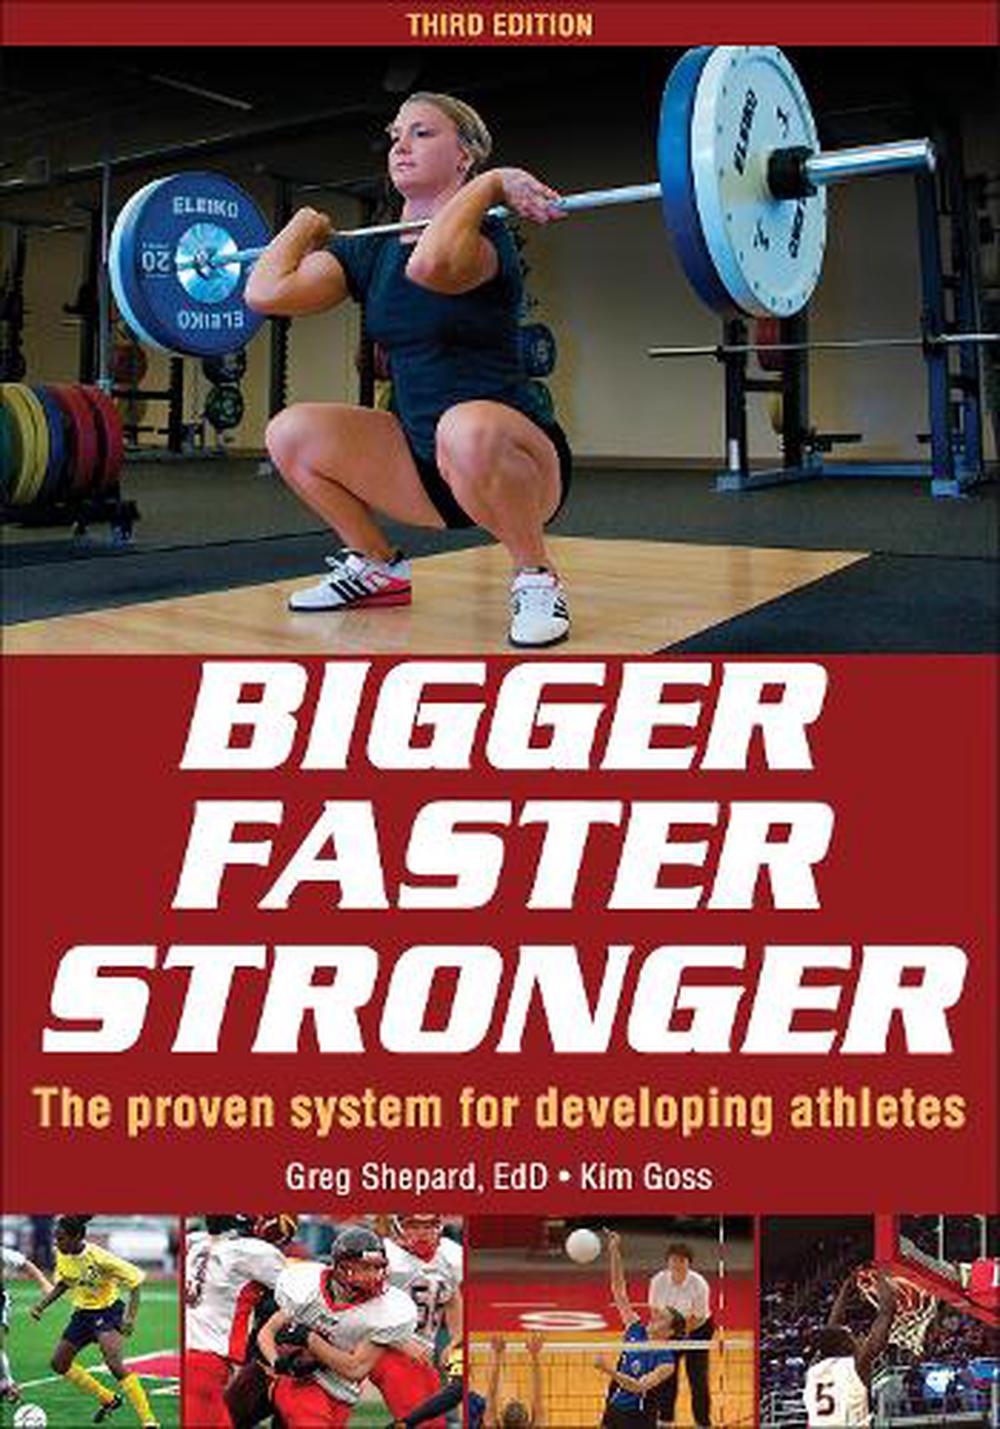 Bigger Faster Stronger 3rd Edition by Greg Shepard (English) Paperback